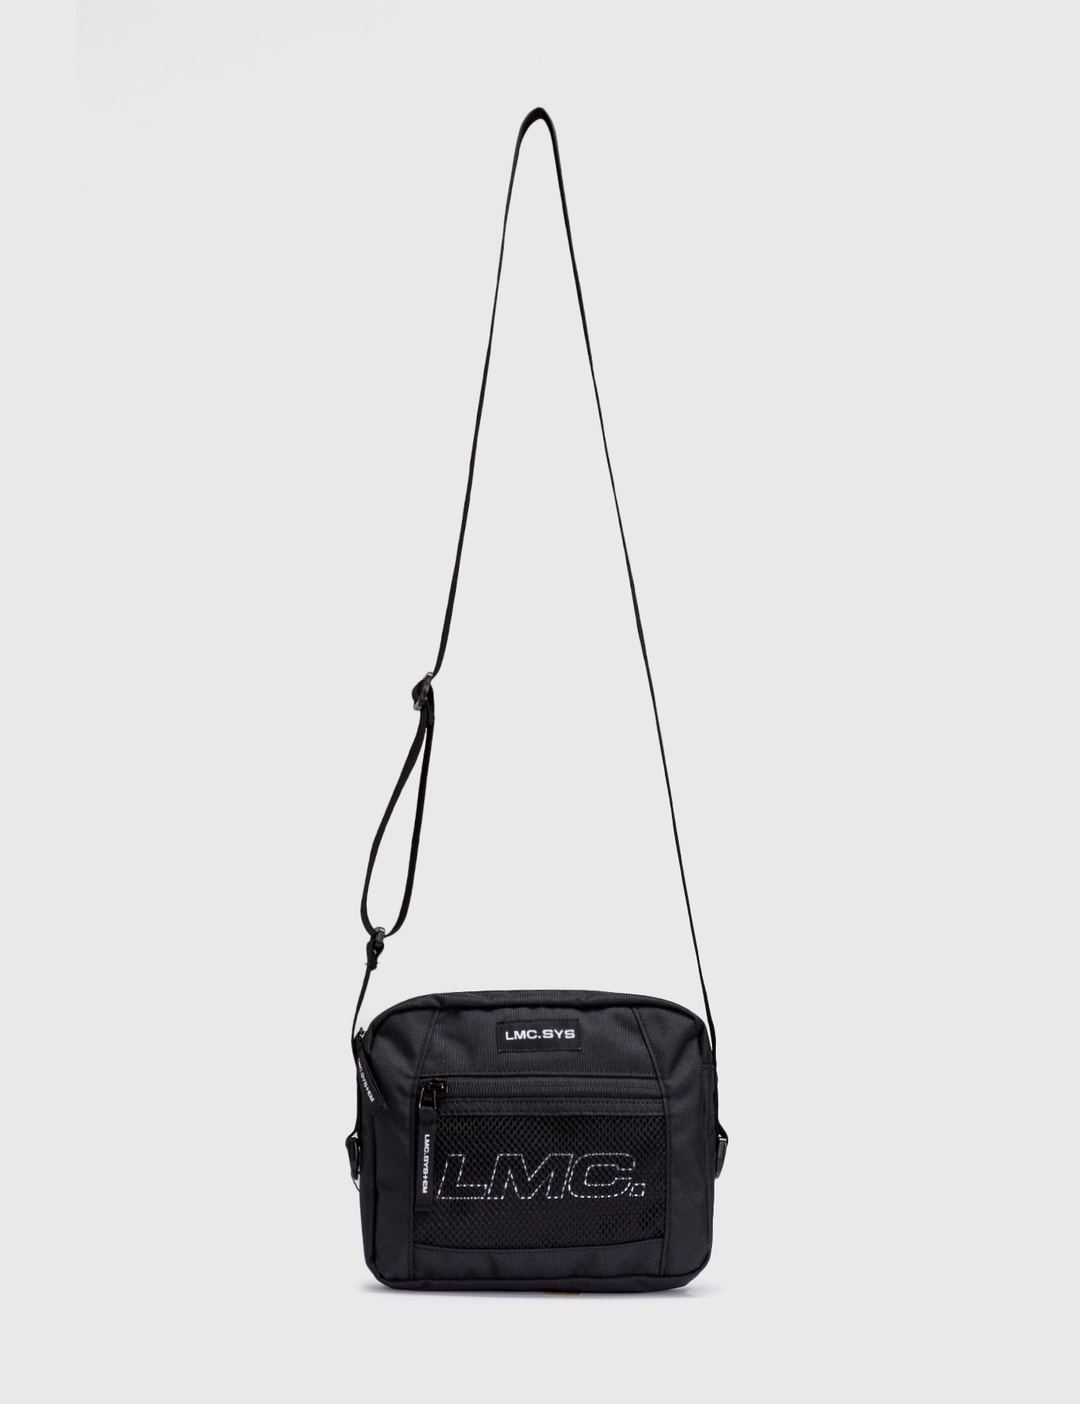 LMC - LMC System Utilize Cross Bag | HBX - Globally Curated Fashion and ...